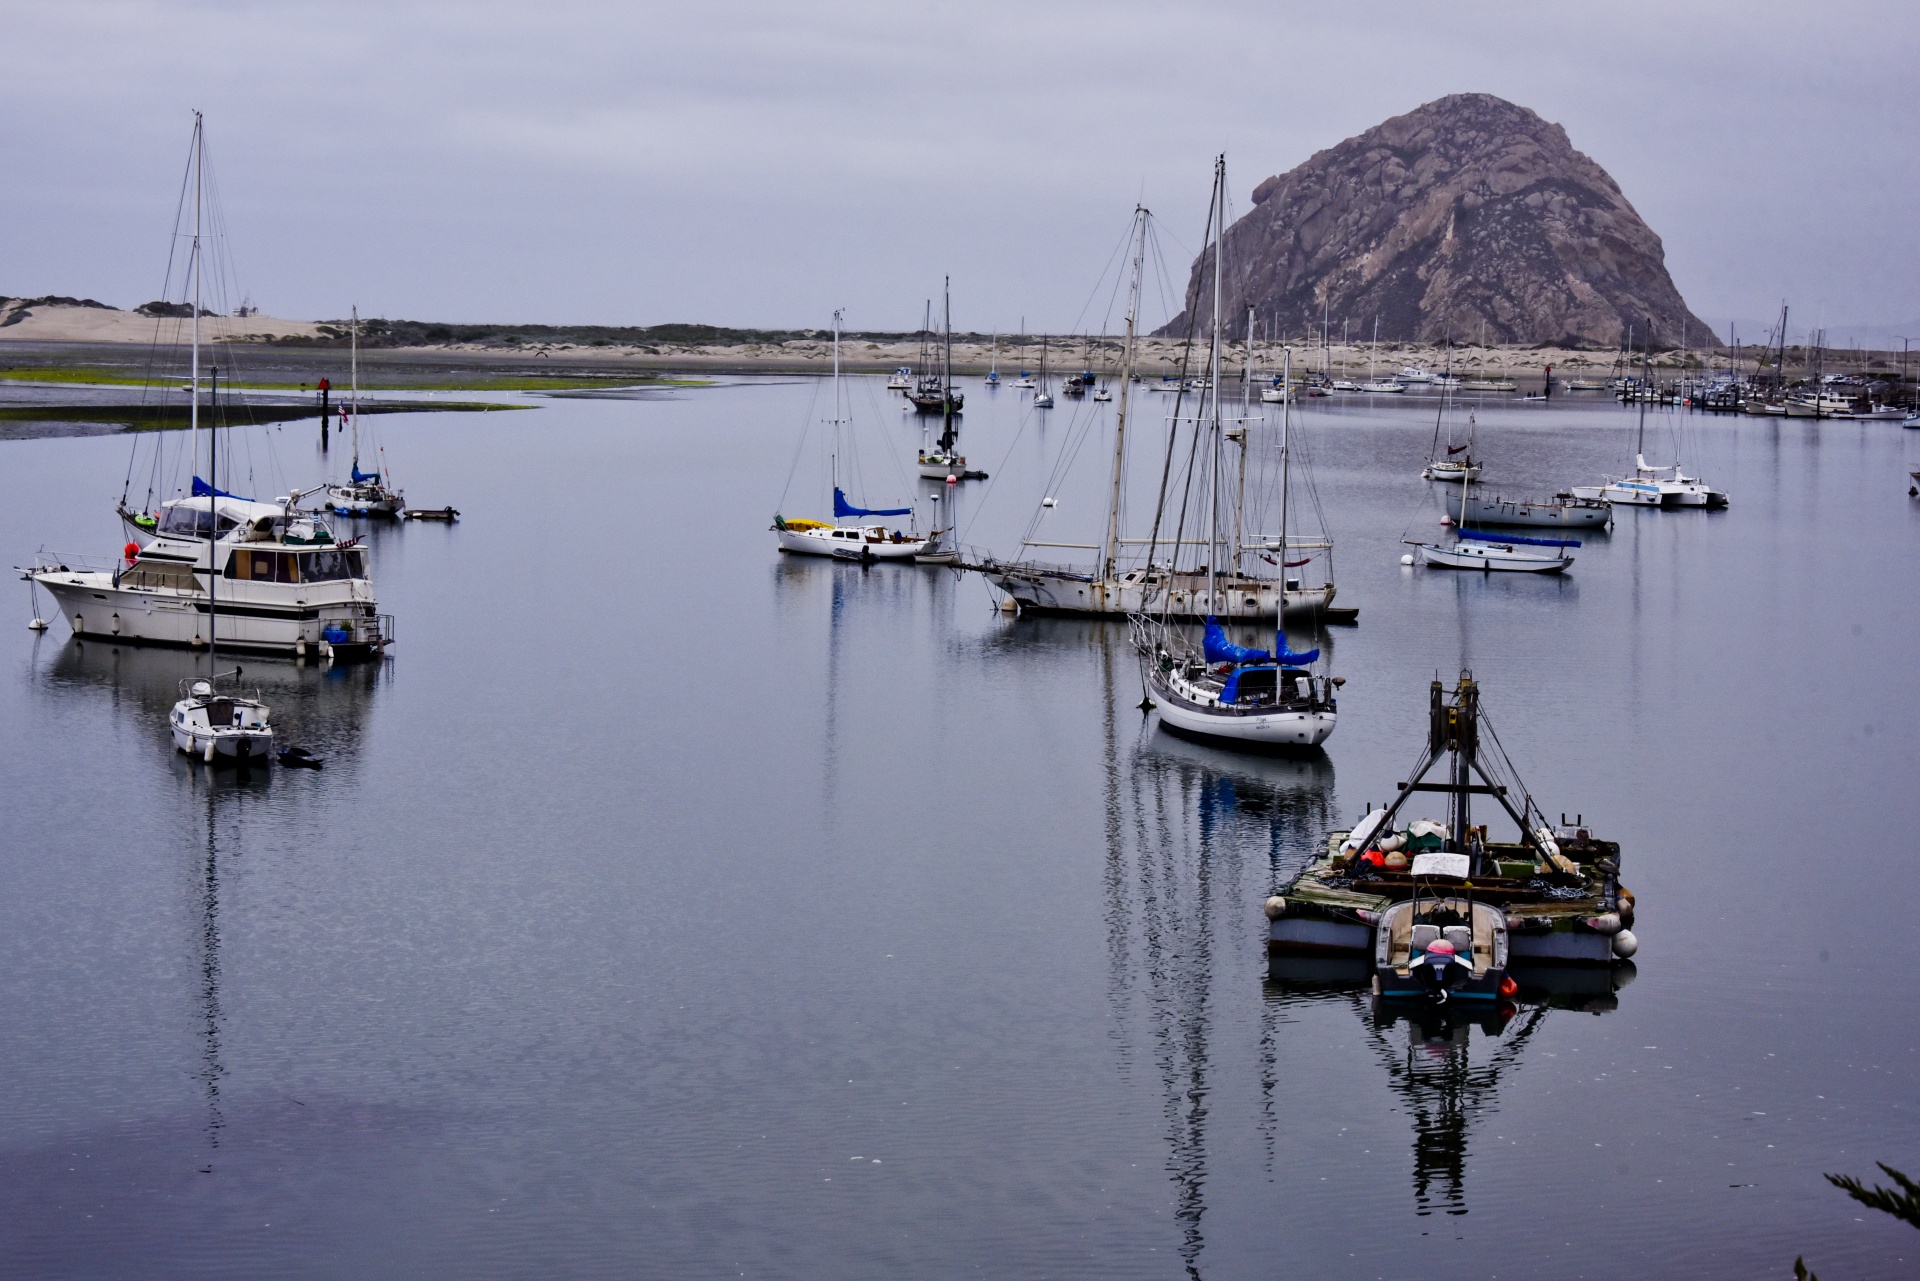 morro bay,landscape,water,bay,ships,background,morro bay morning,free pictures, free photos, free images, royalty free, free illustrations, public domain